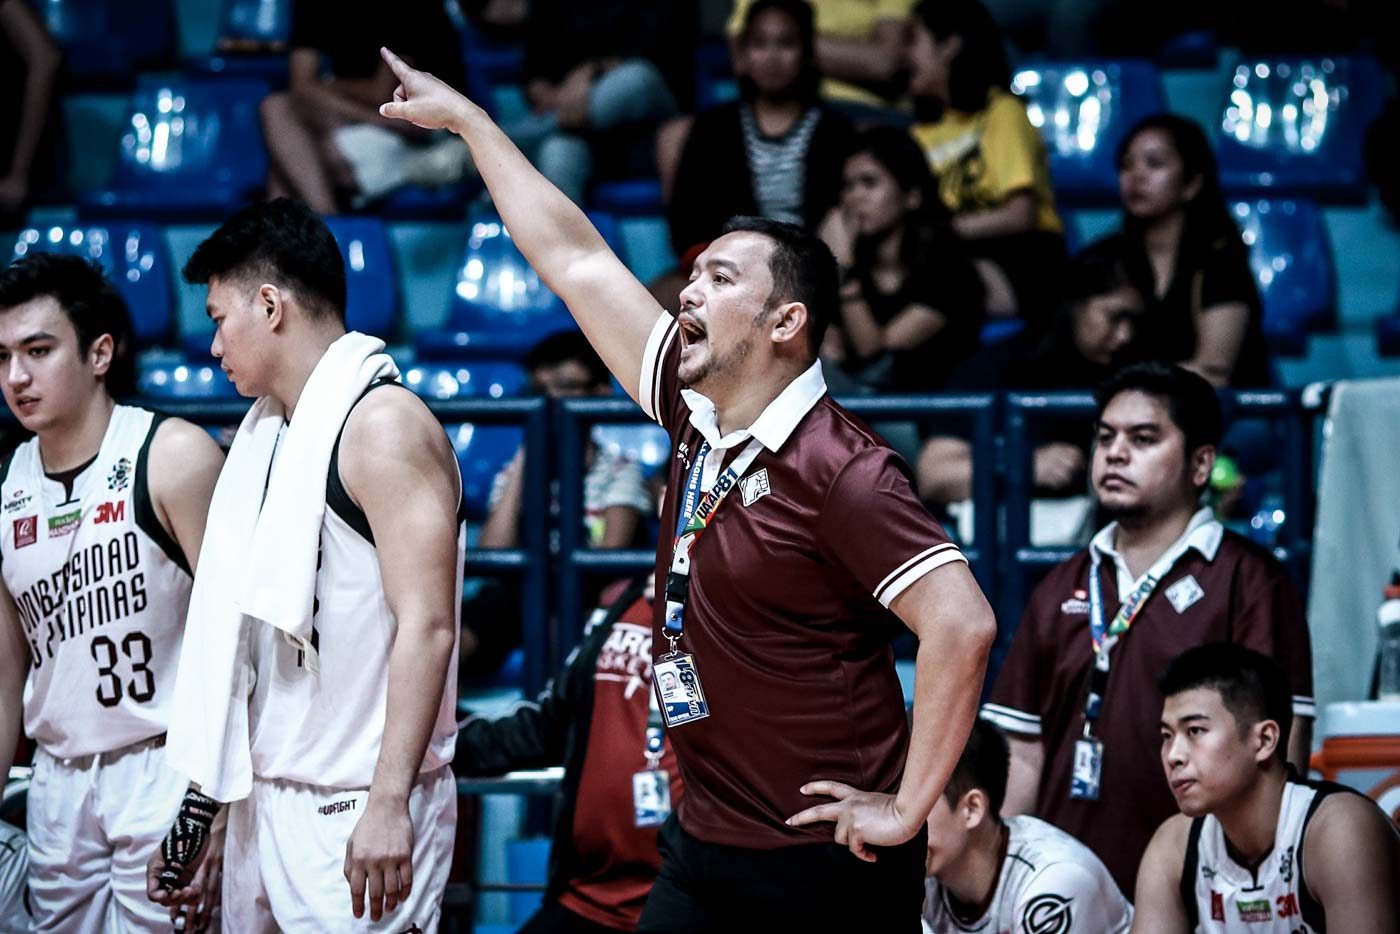 No more miserable Maroons for Perasol